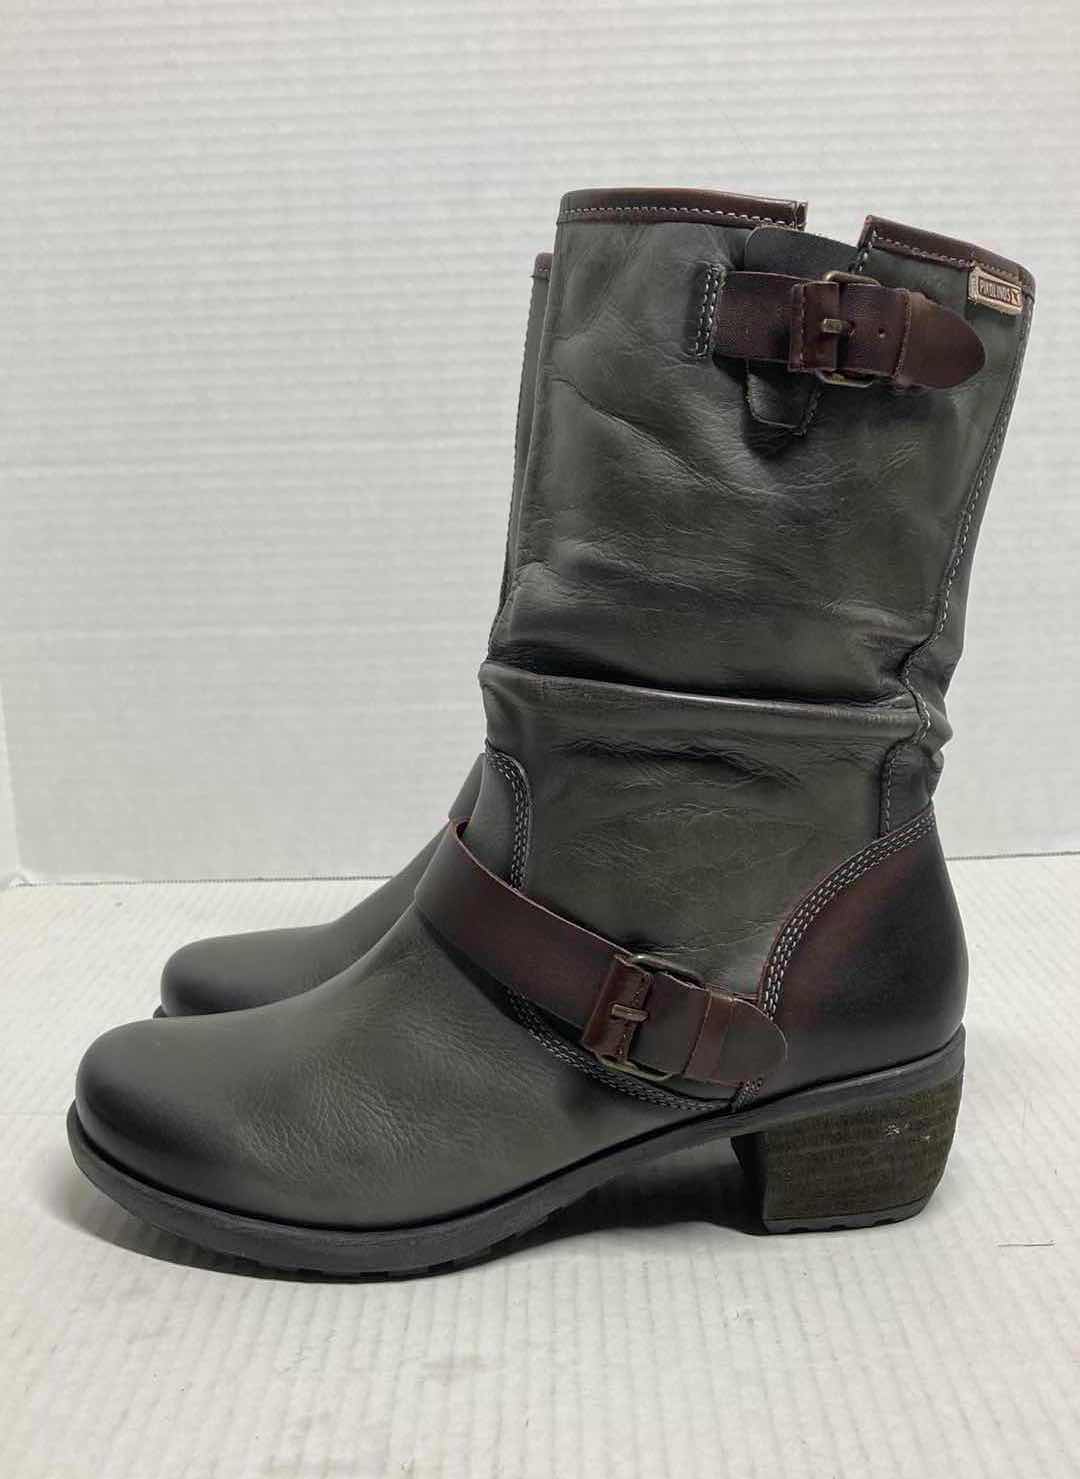 Photo 3 of PIKOLINOS DARK GREY TALL LEATHER COMBAT BOOTS W BROWN BUCKLE WOMAN’S SIZE EU 39